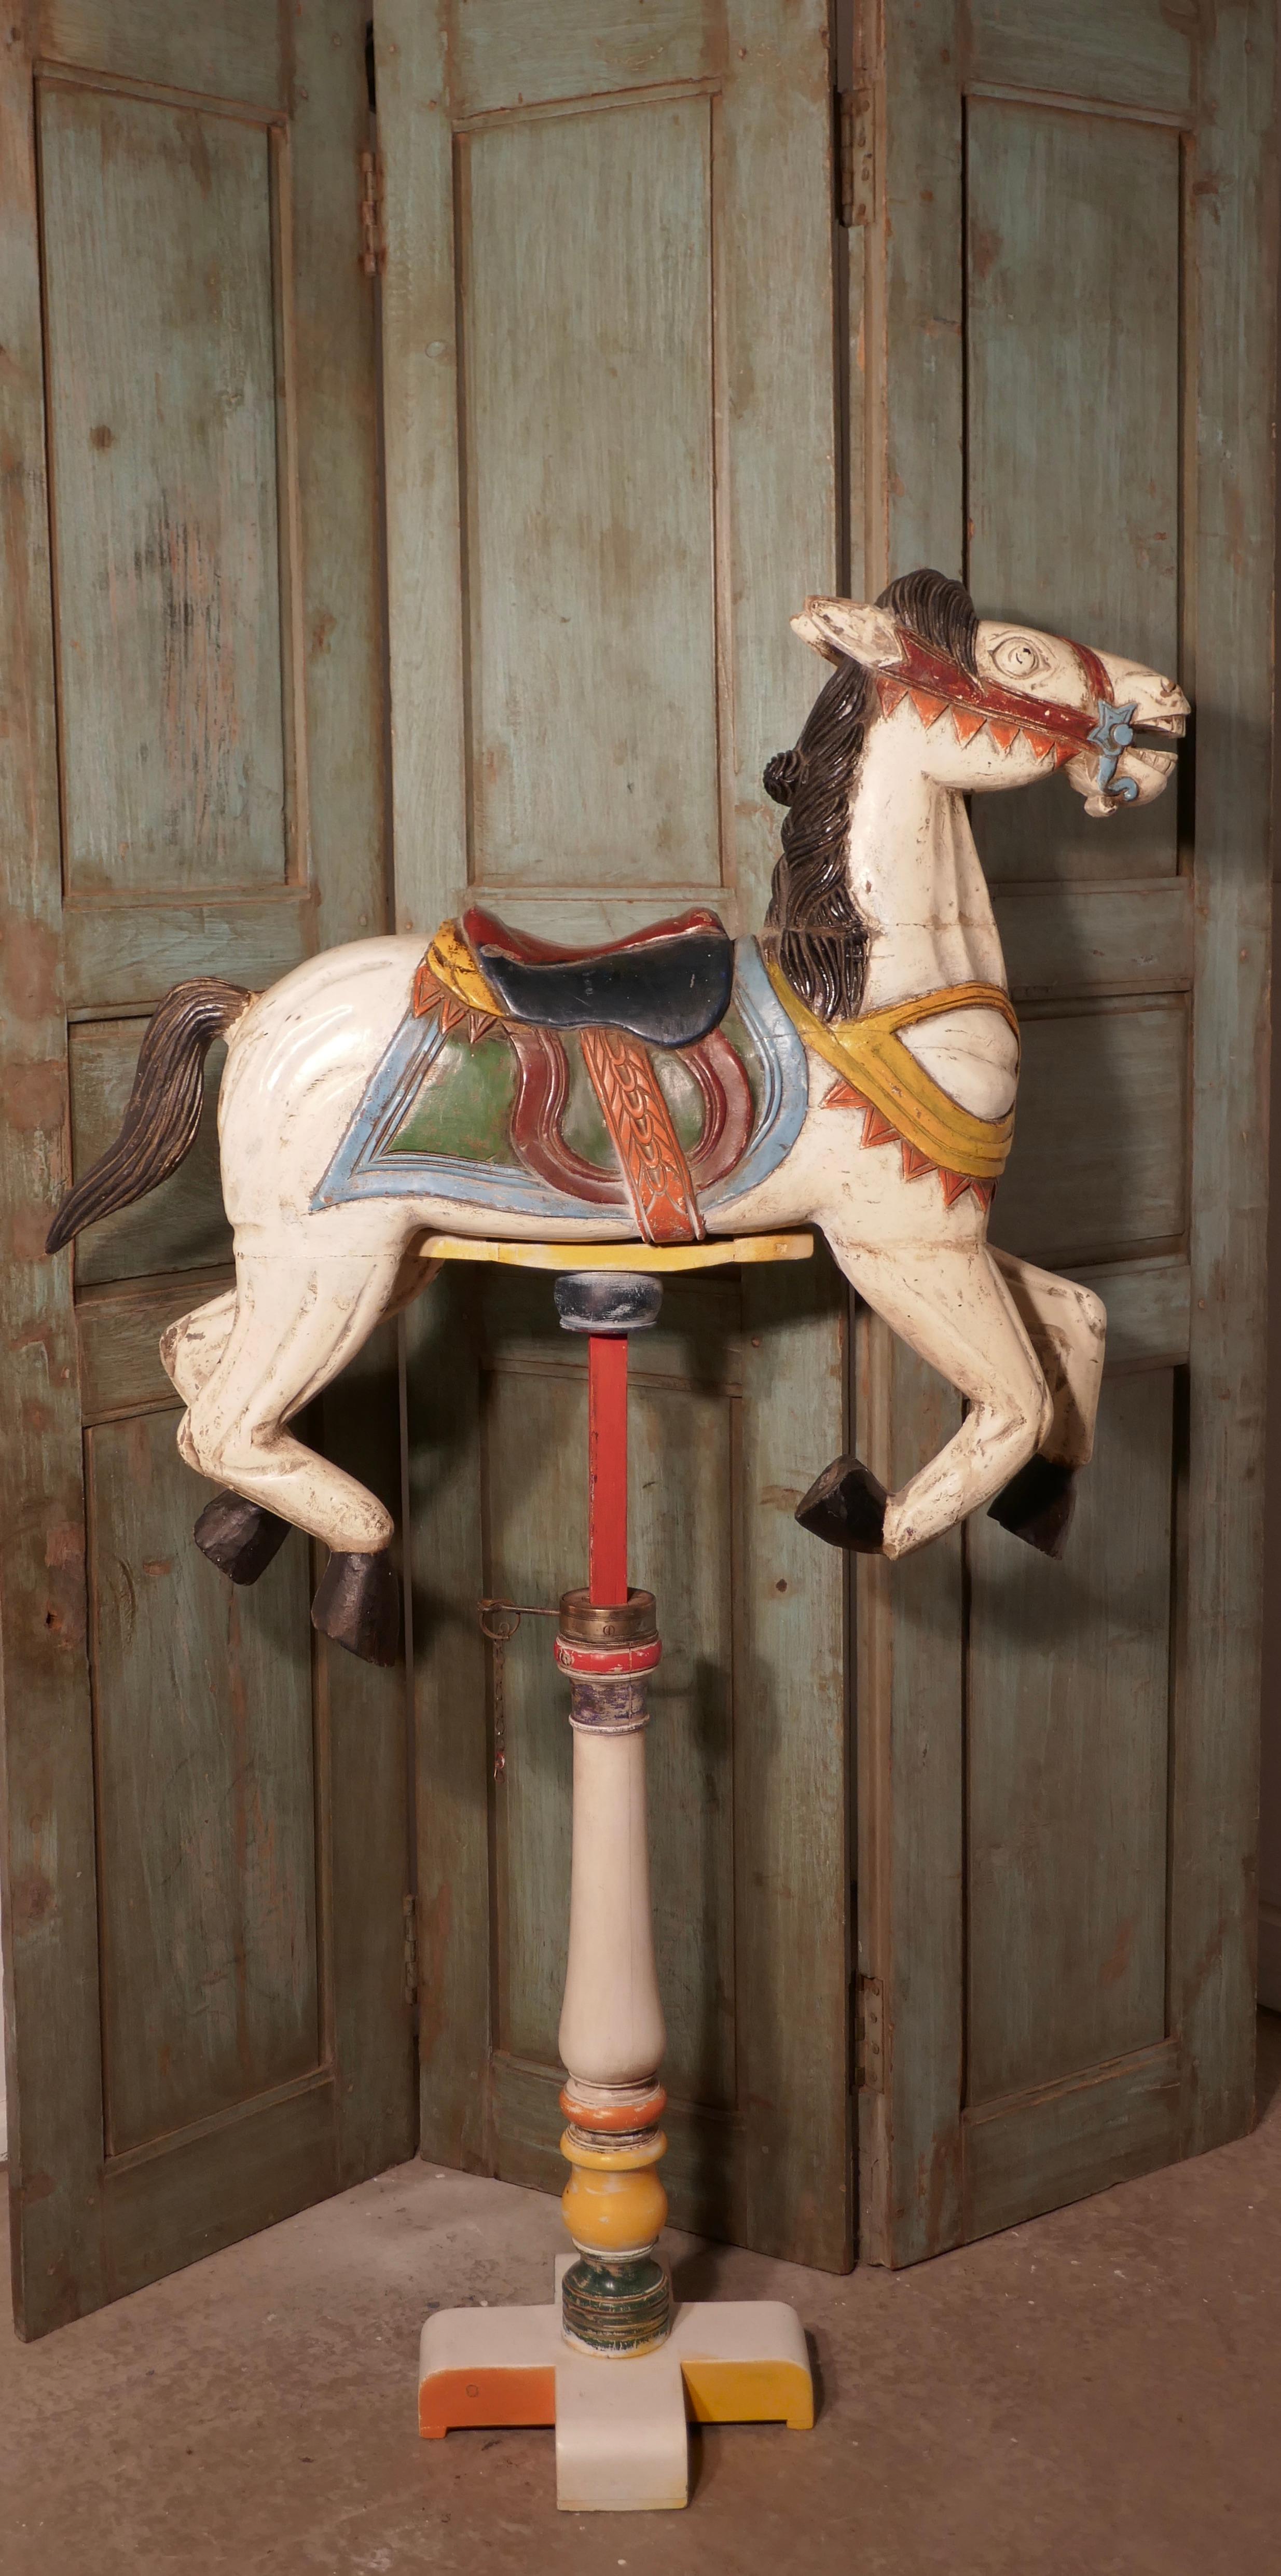 Small 19th century painted wooden Carousel Galloper or fair ground horse


An original the 19th century fair ground Galloper, he is made in wood, the carnival paint is bright and seems to be the original design 
The horse is set on an old